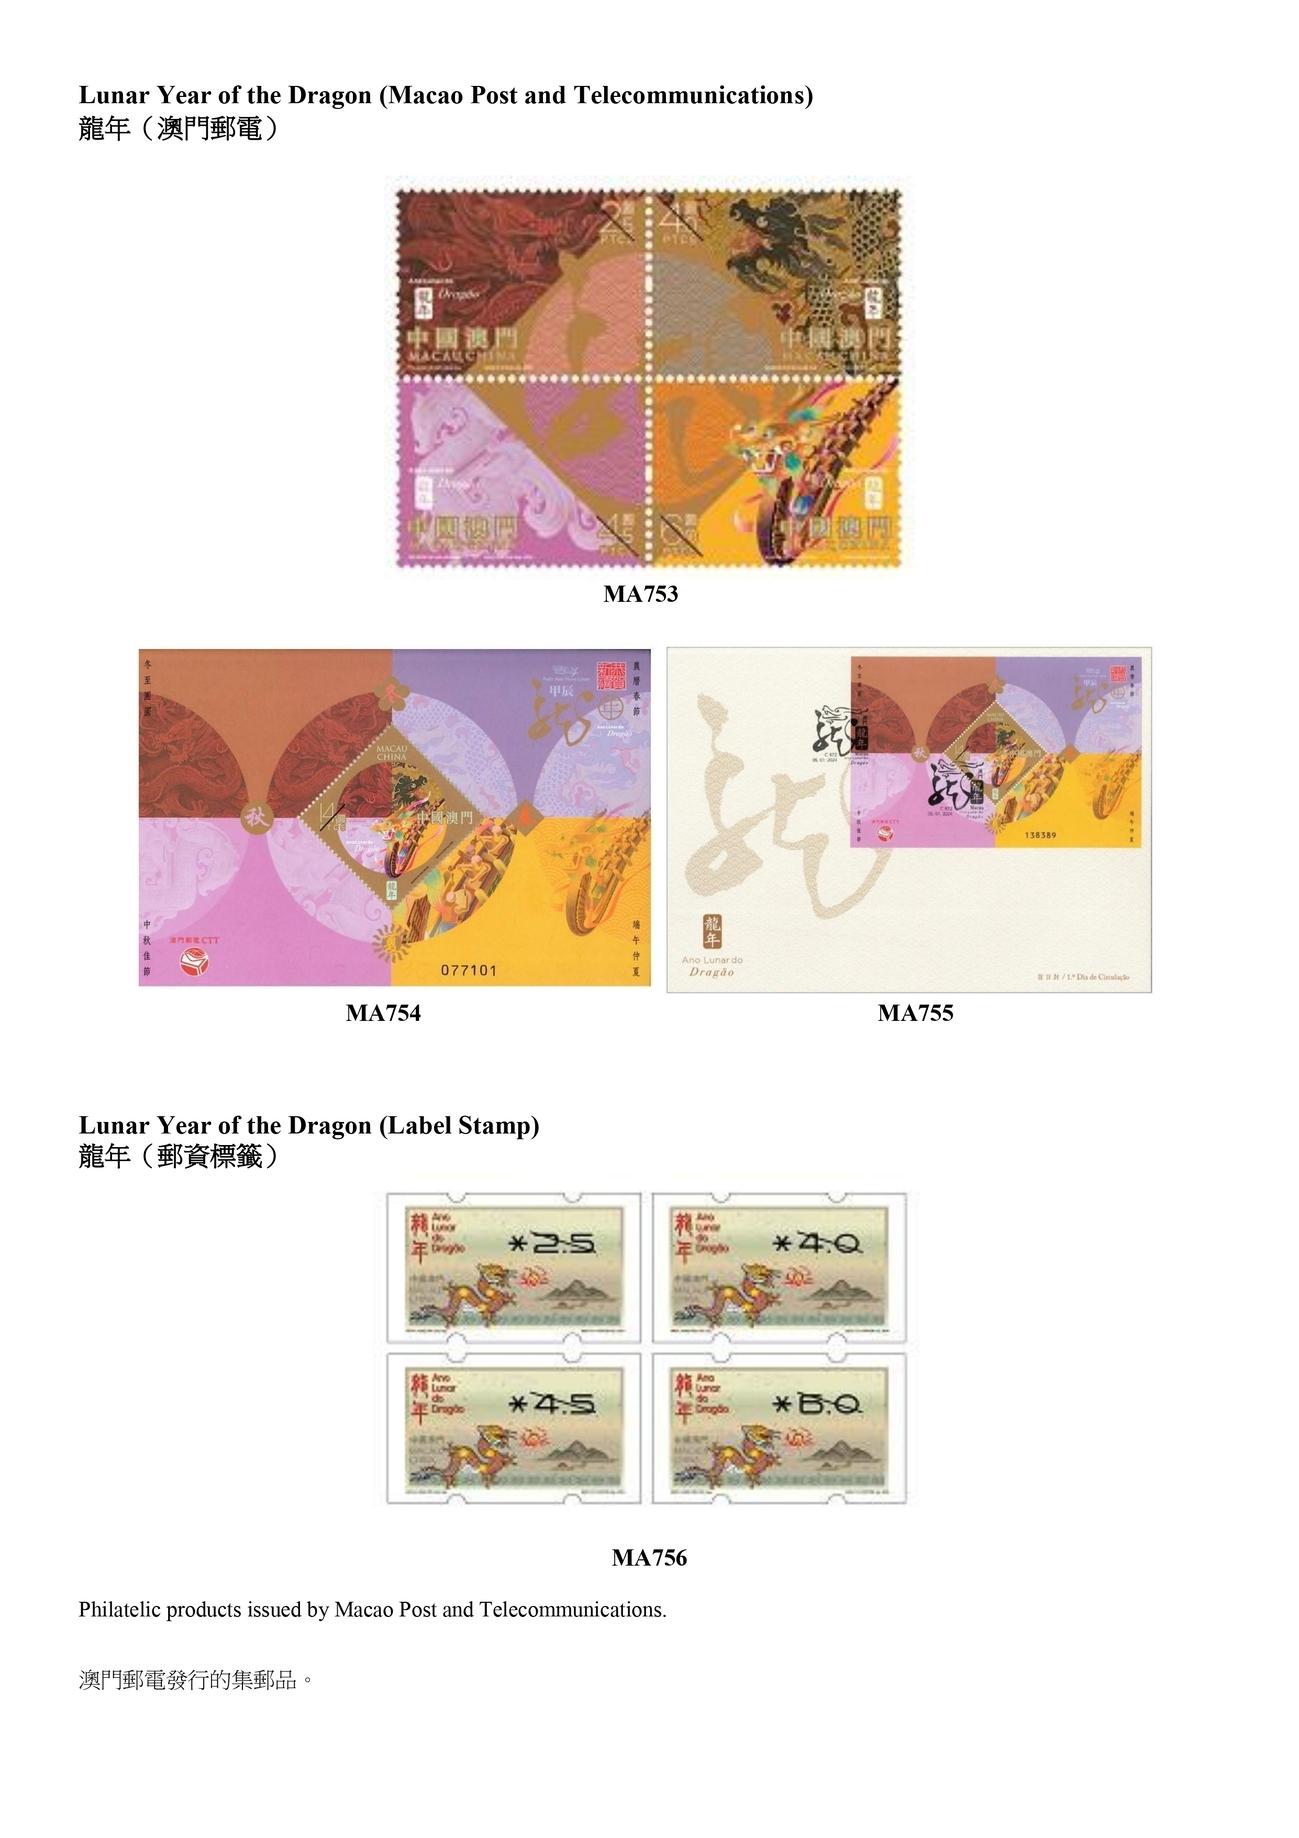 Hongkong Post announced today (April 29) that selected philatelic products issued by China Post, Macao Post and Telecommunications and the postal administrations of Australia, Isle of Man, Liechtenstein, New Zealand and the United Nations will be available for sale from tomorrow (April 30). Picture shows philatelic products issued by Macao Post and Telecommunications.